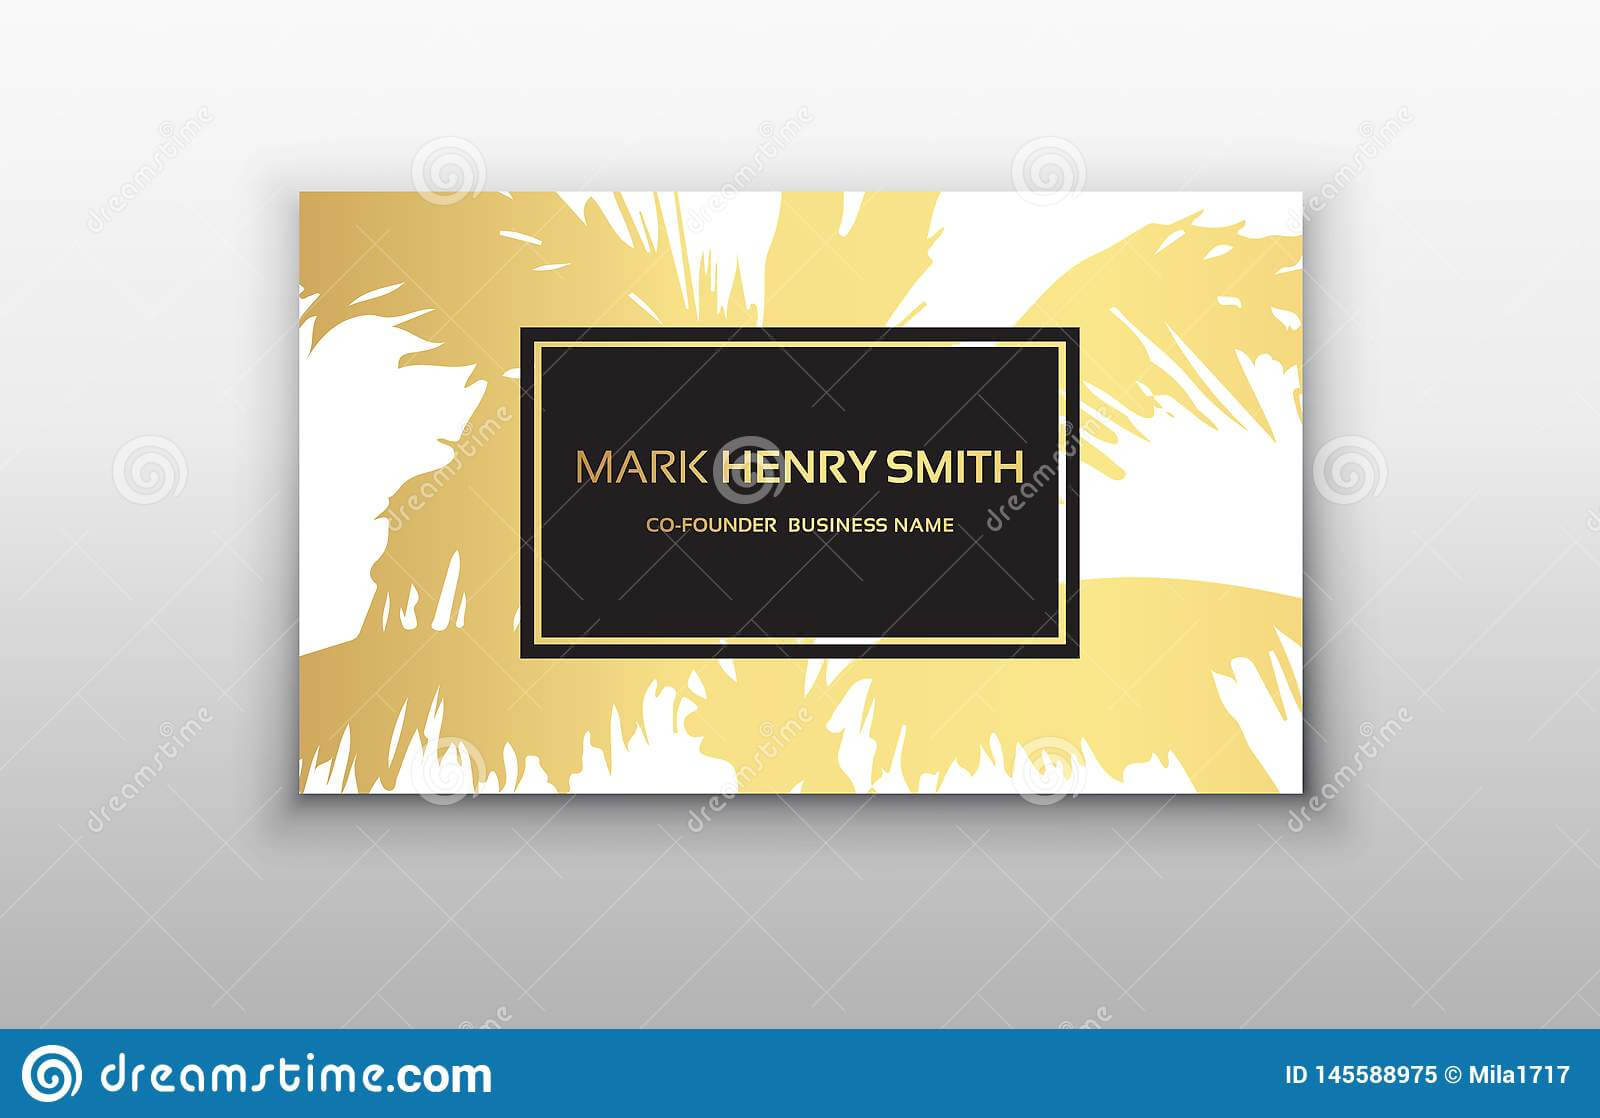 Business Cards Tropical Graphic Design, Tropical Palm Leaf Throughout Christian Business Cards Templates Free